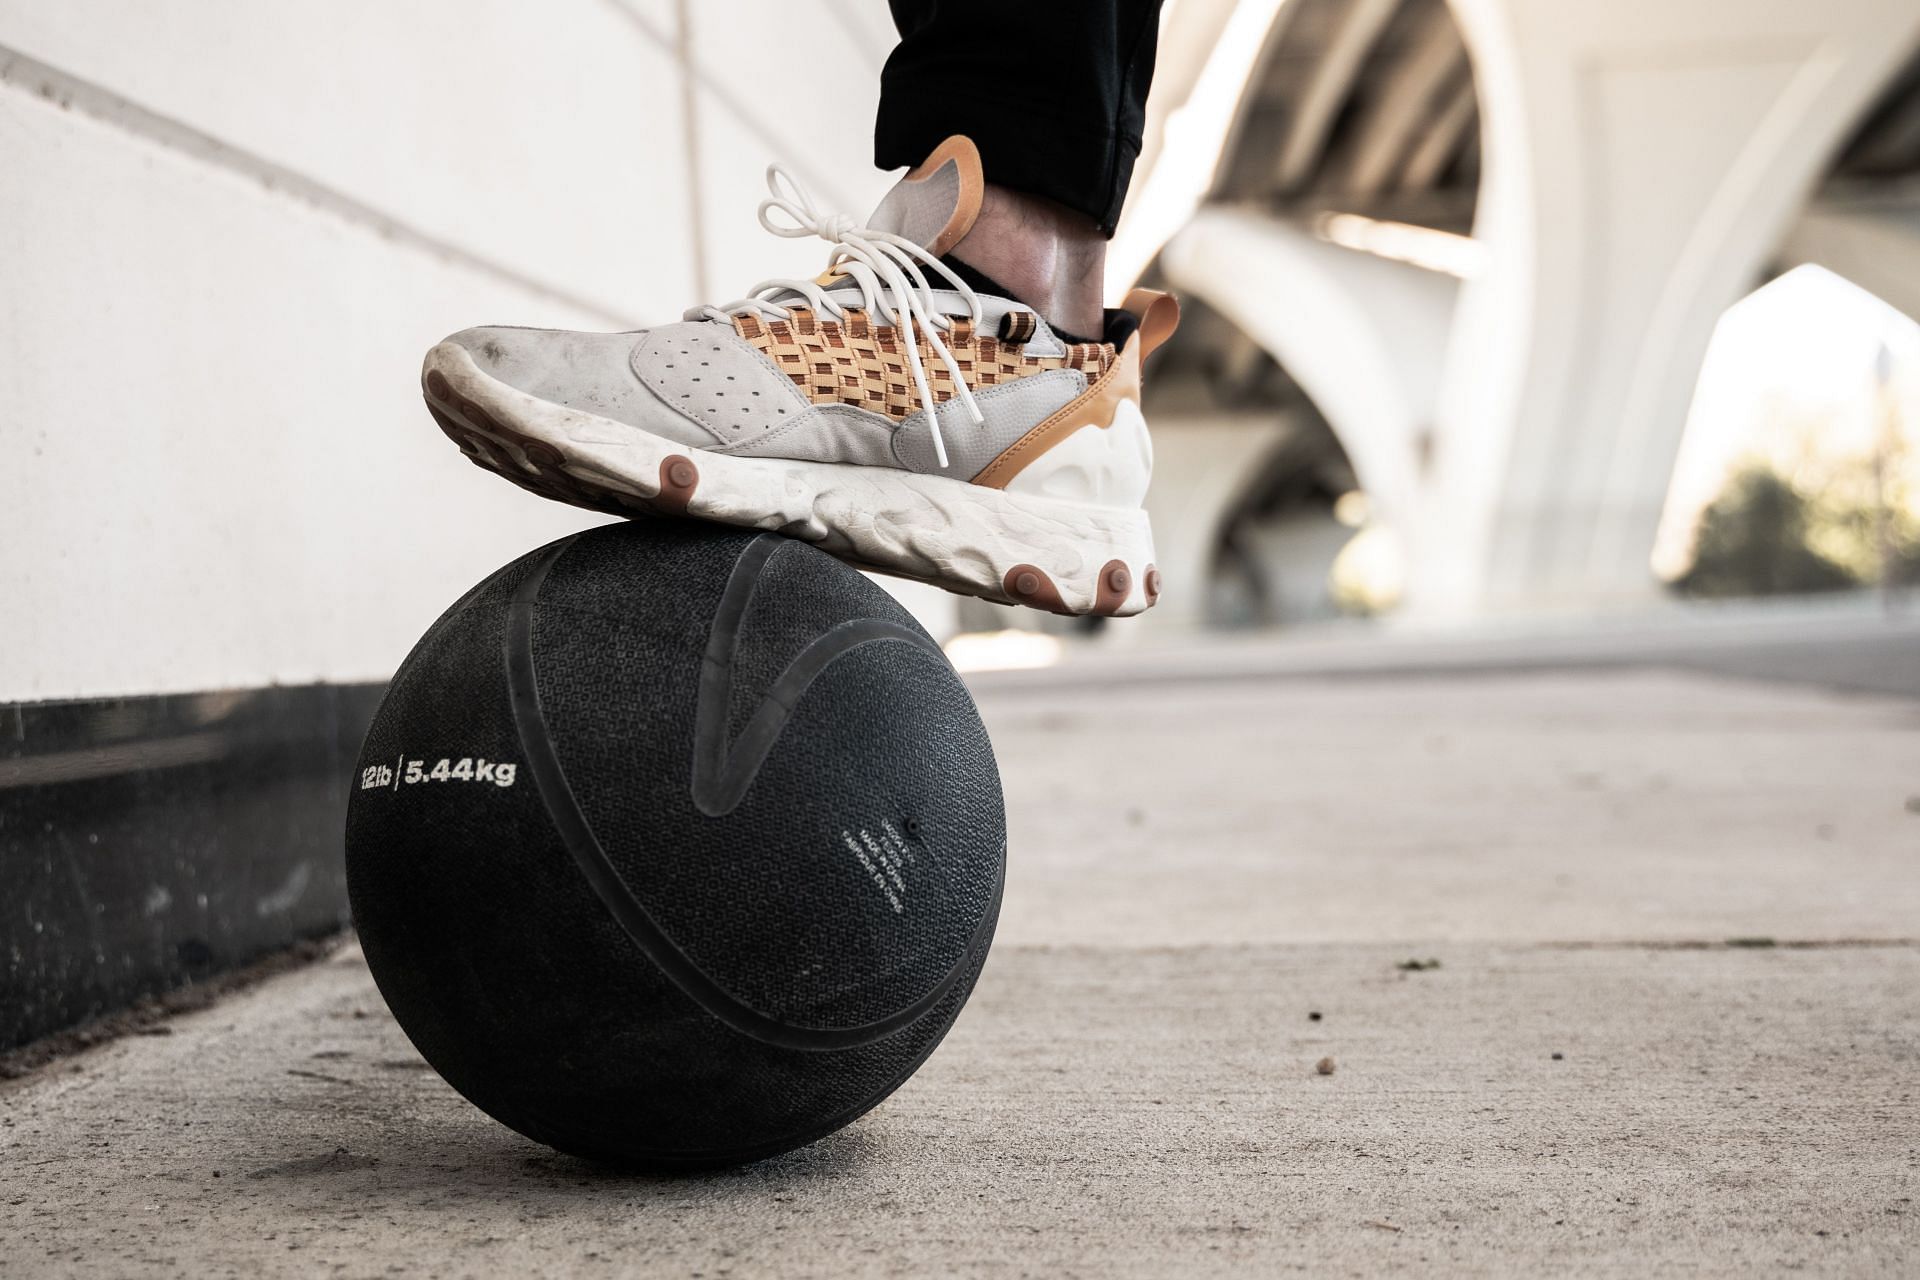 Medicine ball exercises can help you to strengthen your arms and shoulders. (Image via Unsplash / Brendan Stephens)